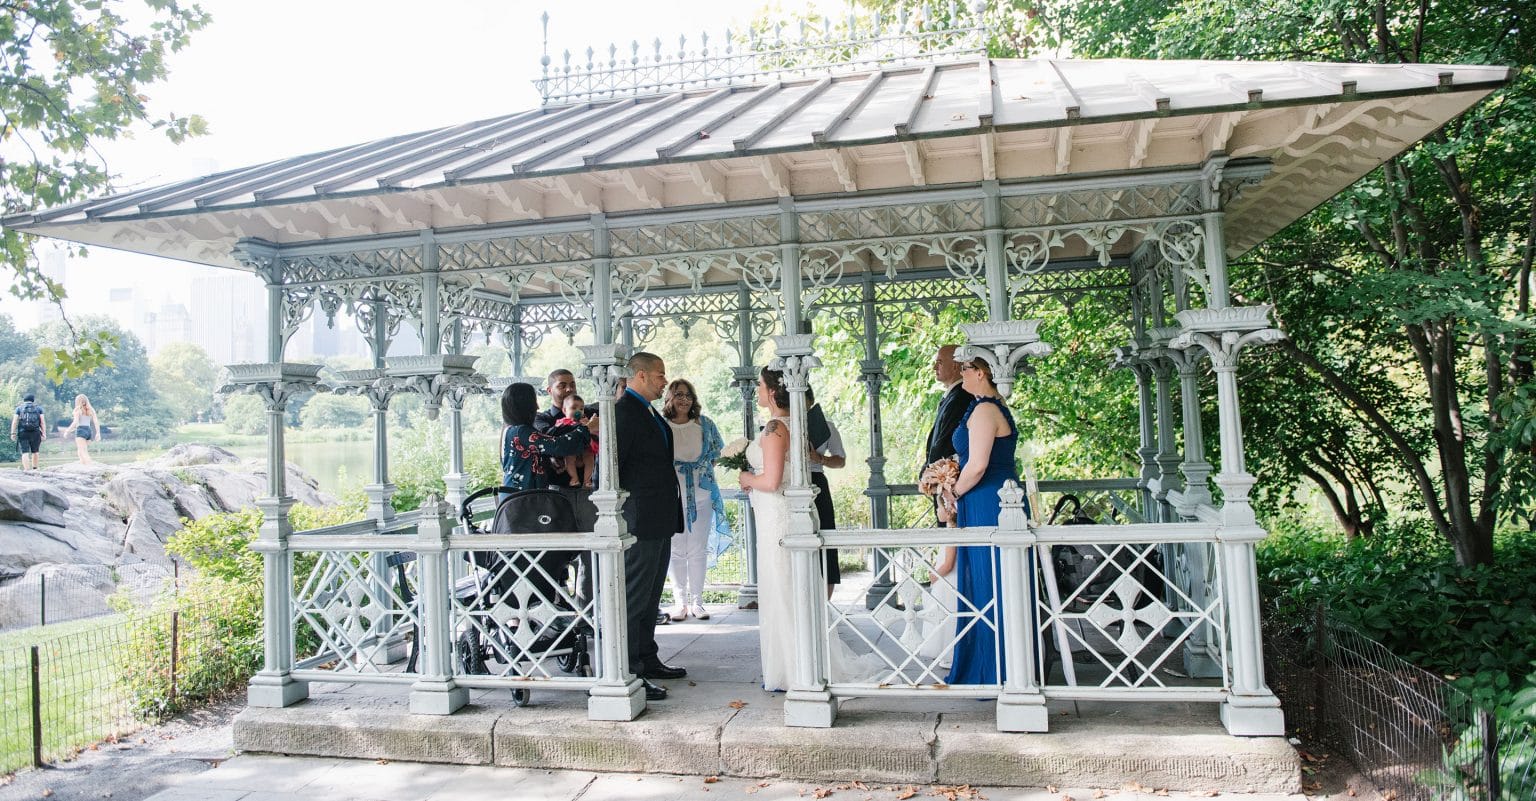 5 Best Small Central Park Wedding Locations in New York